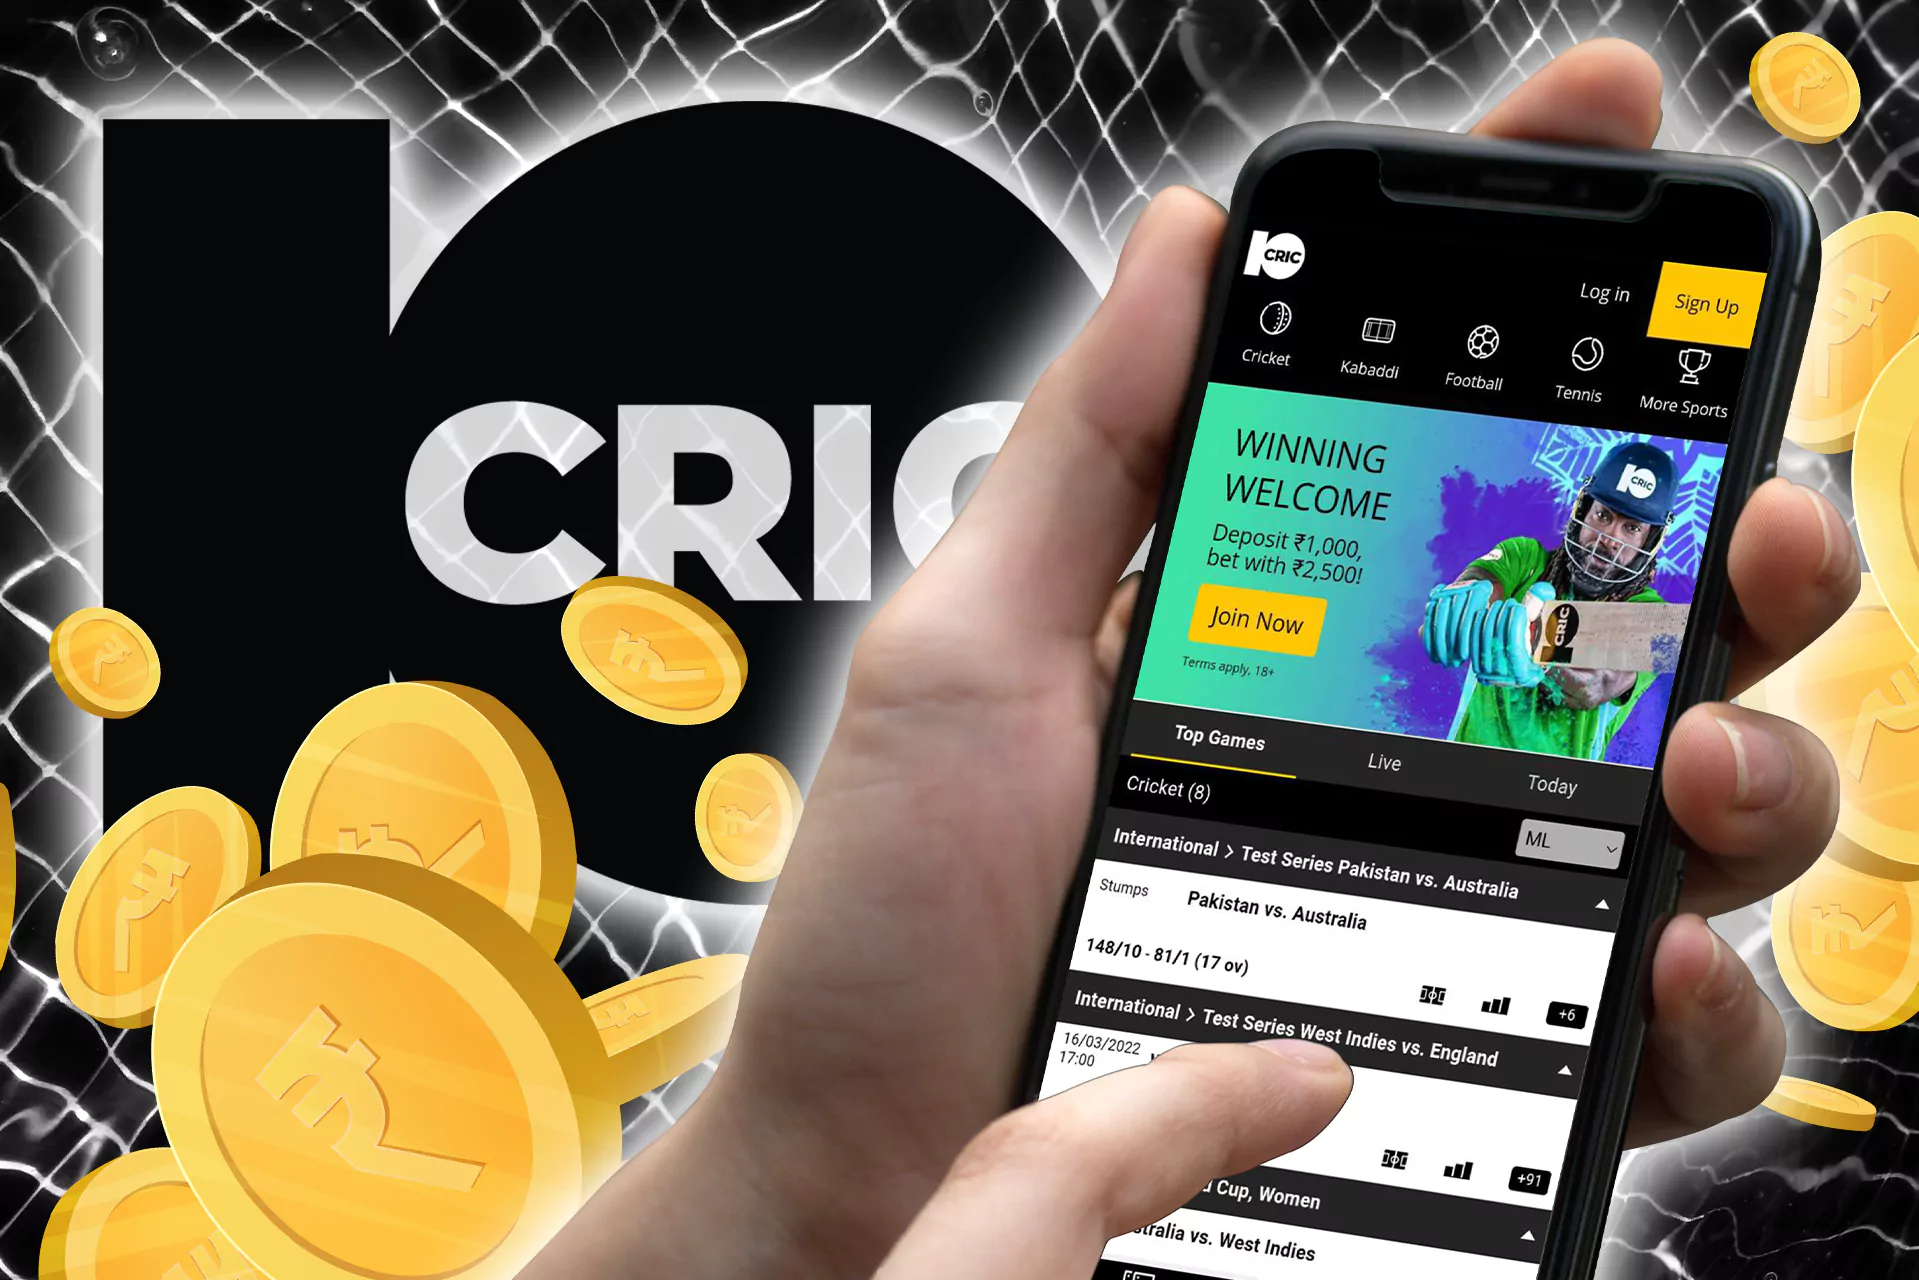 The 10Cric app is one of the best for online sports betting.